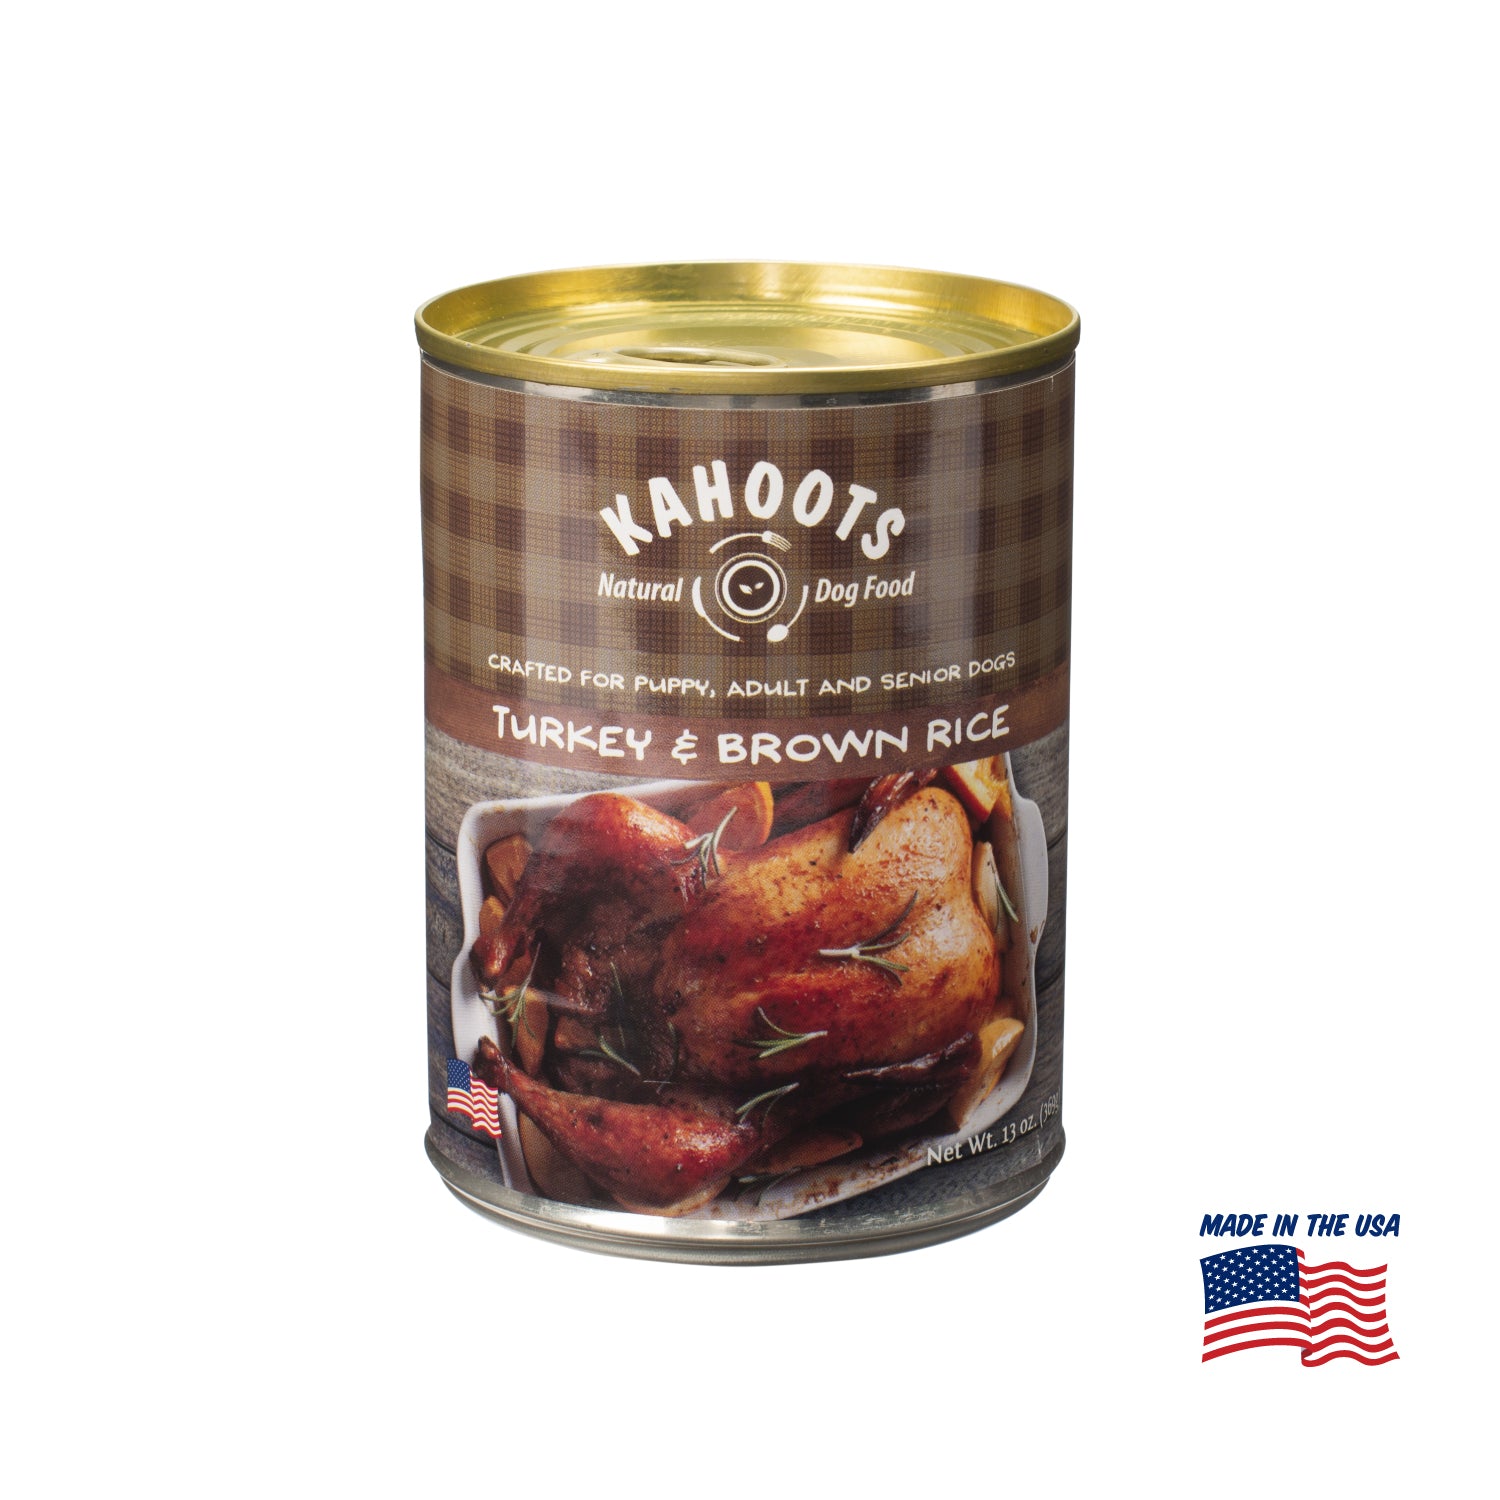 Kahoots turkey and rice wet dog food can, made in the USA